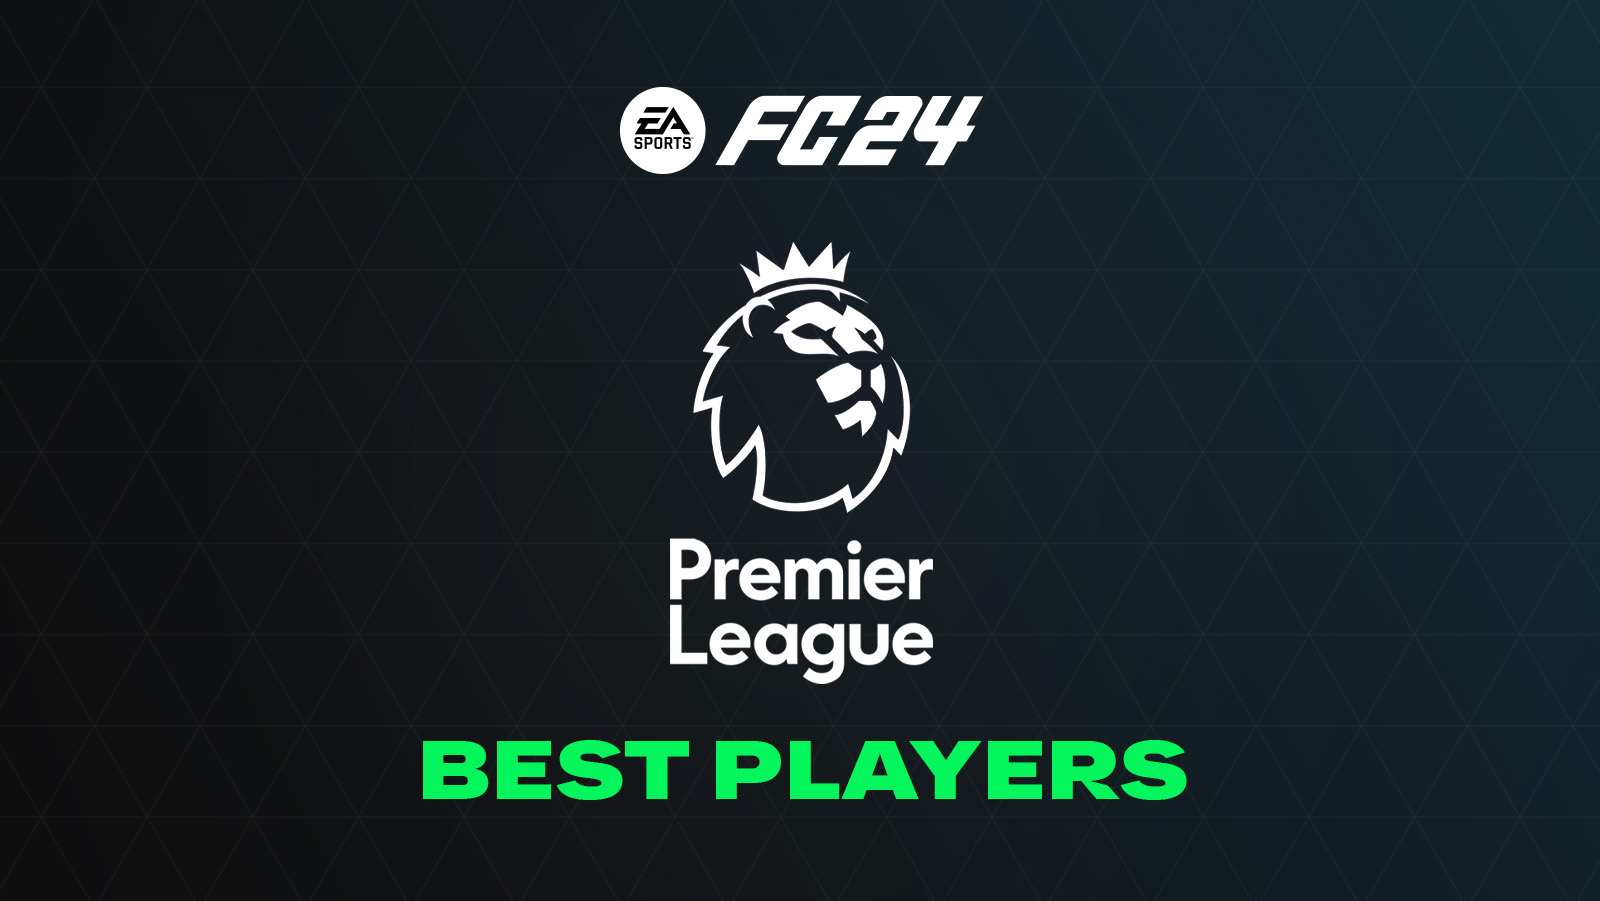 FC 24 Top Players from Premier League